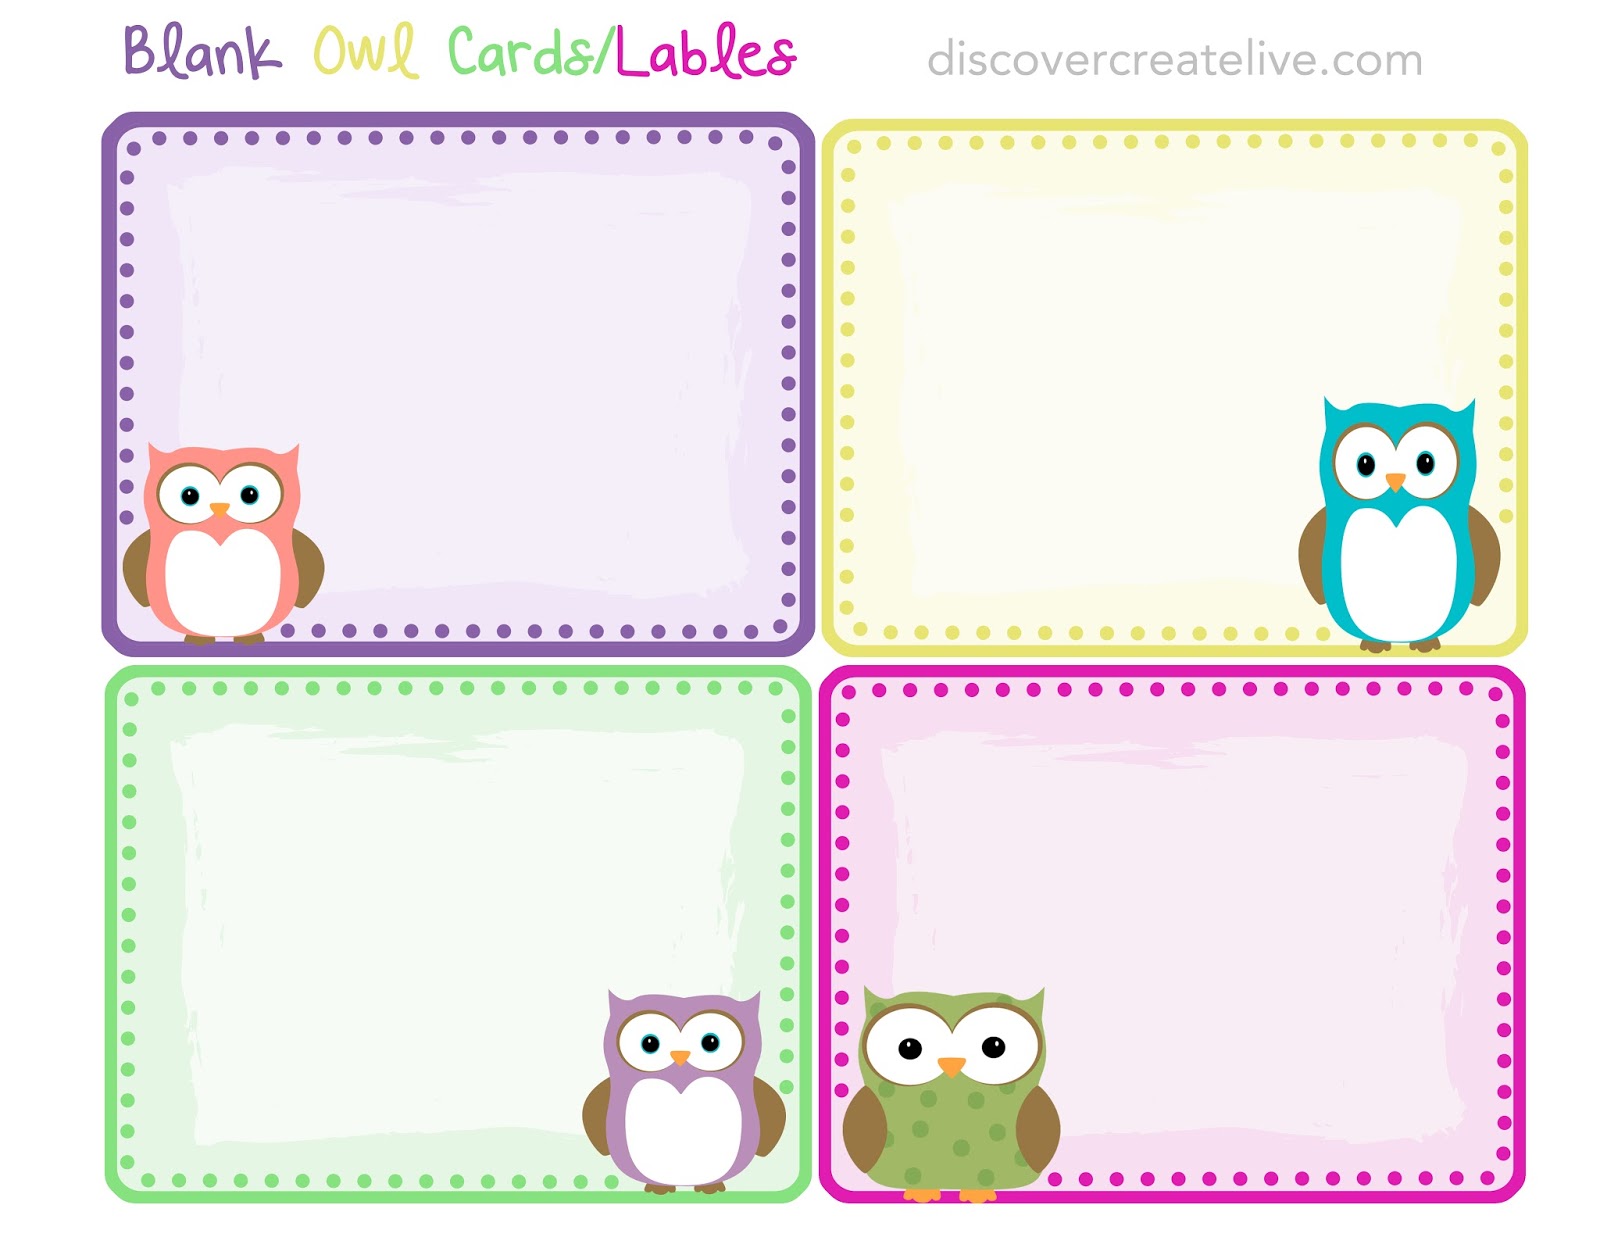 Graphic Monday: Blank Owl Cards/Lables